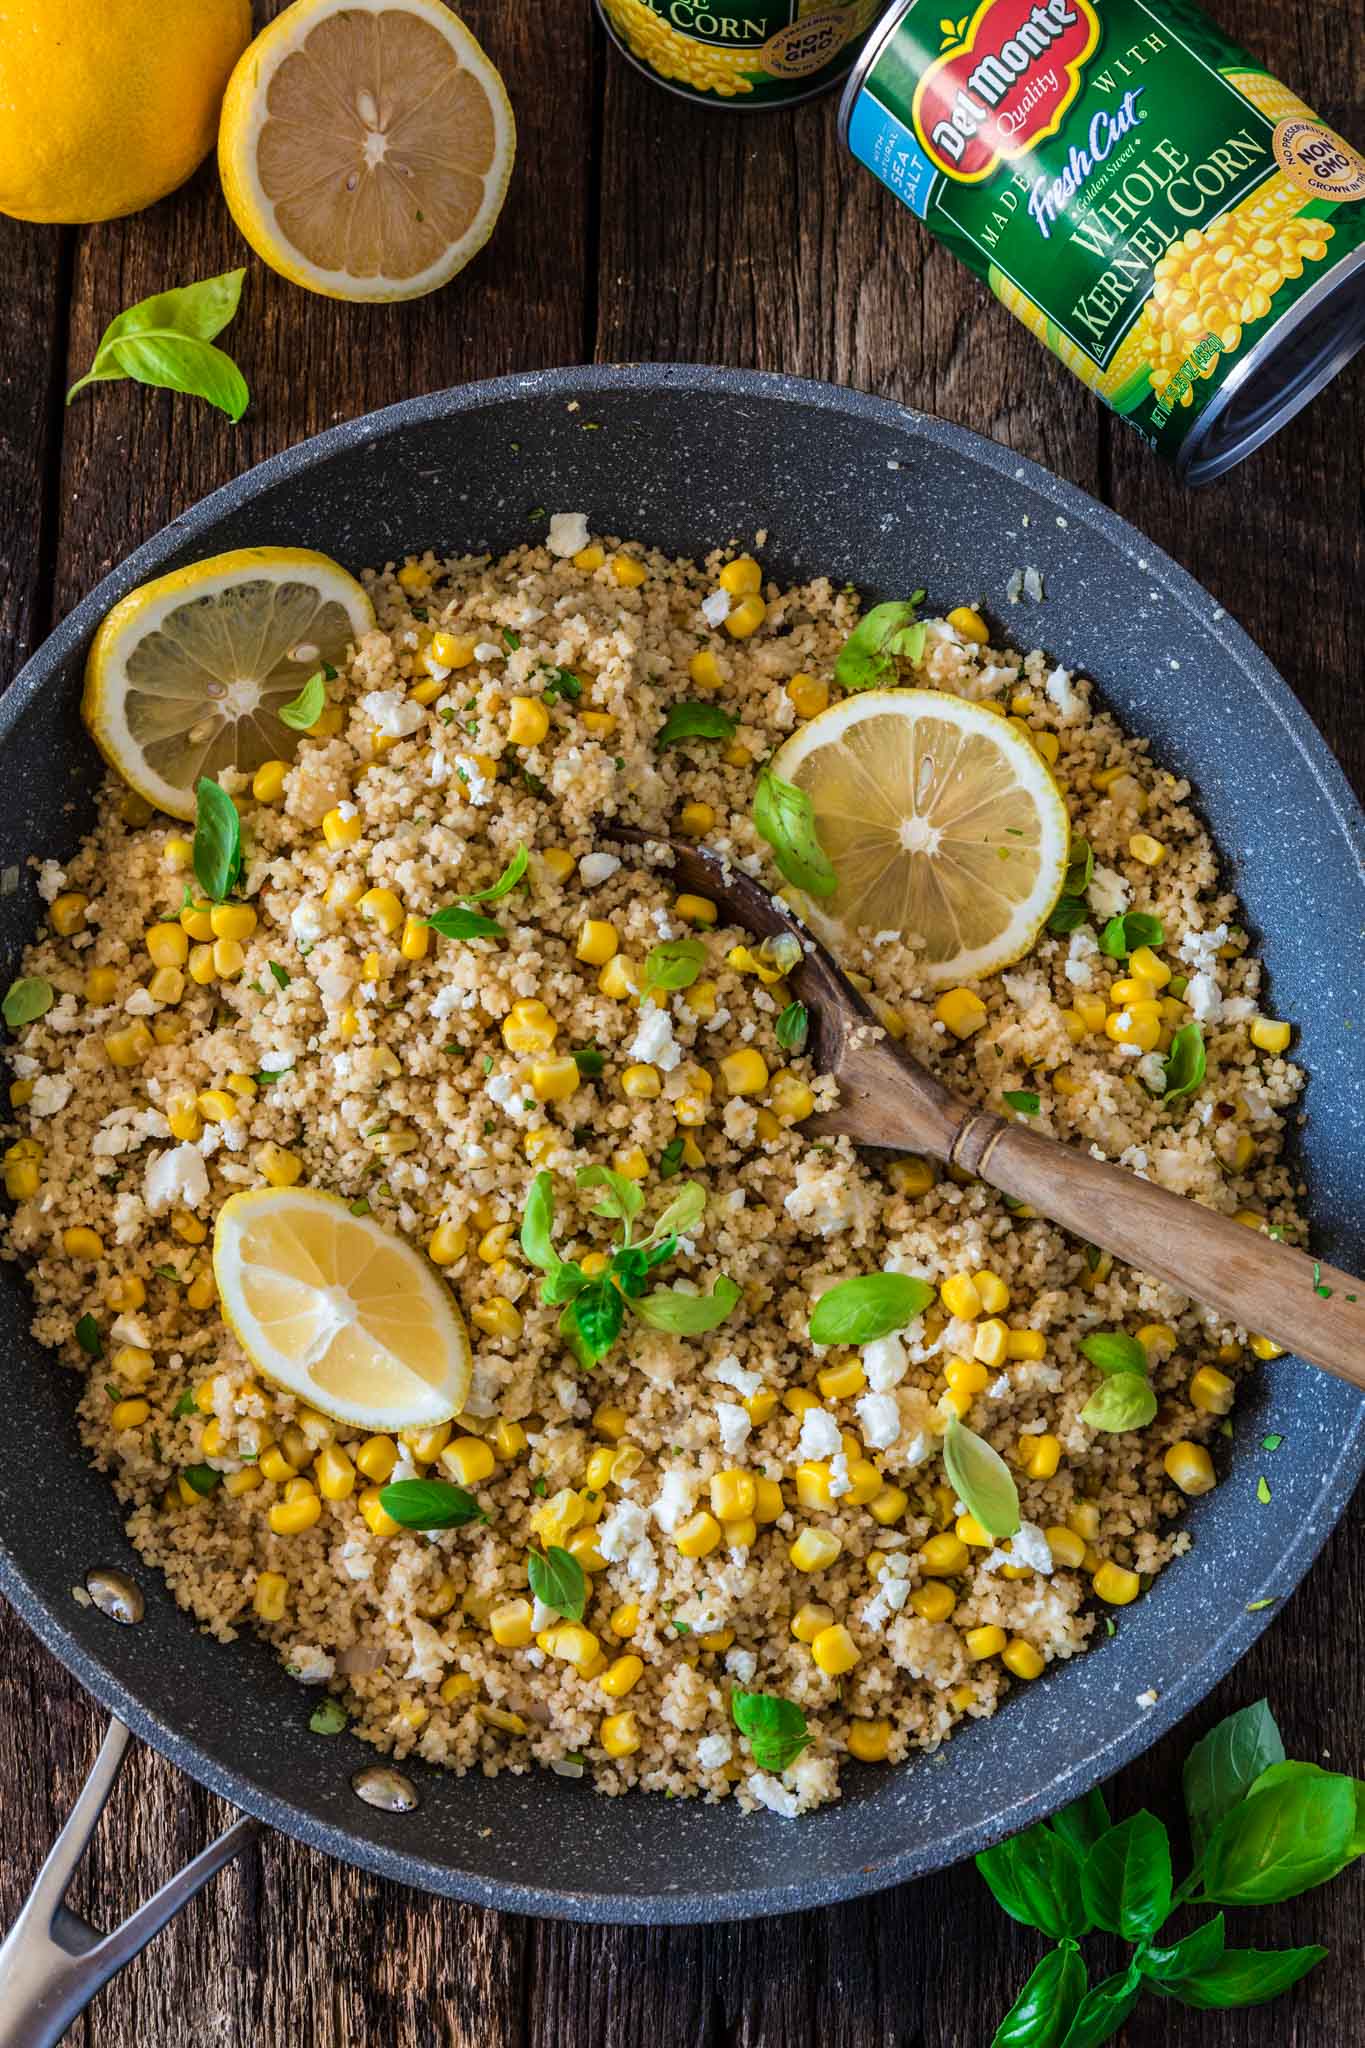 Corn Couscous with Basil, Feta and Lemon | www.oliviascuisine.com | This simple dish, packed with Mediterranean flavors, consists of only 7 main ingredients and is done in about 5 minutes. Serve it warm as a side dish, or cold as a salad. (Recipe and food photography by @oliviascuisine.)